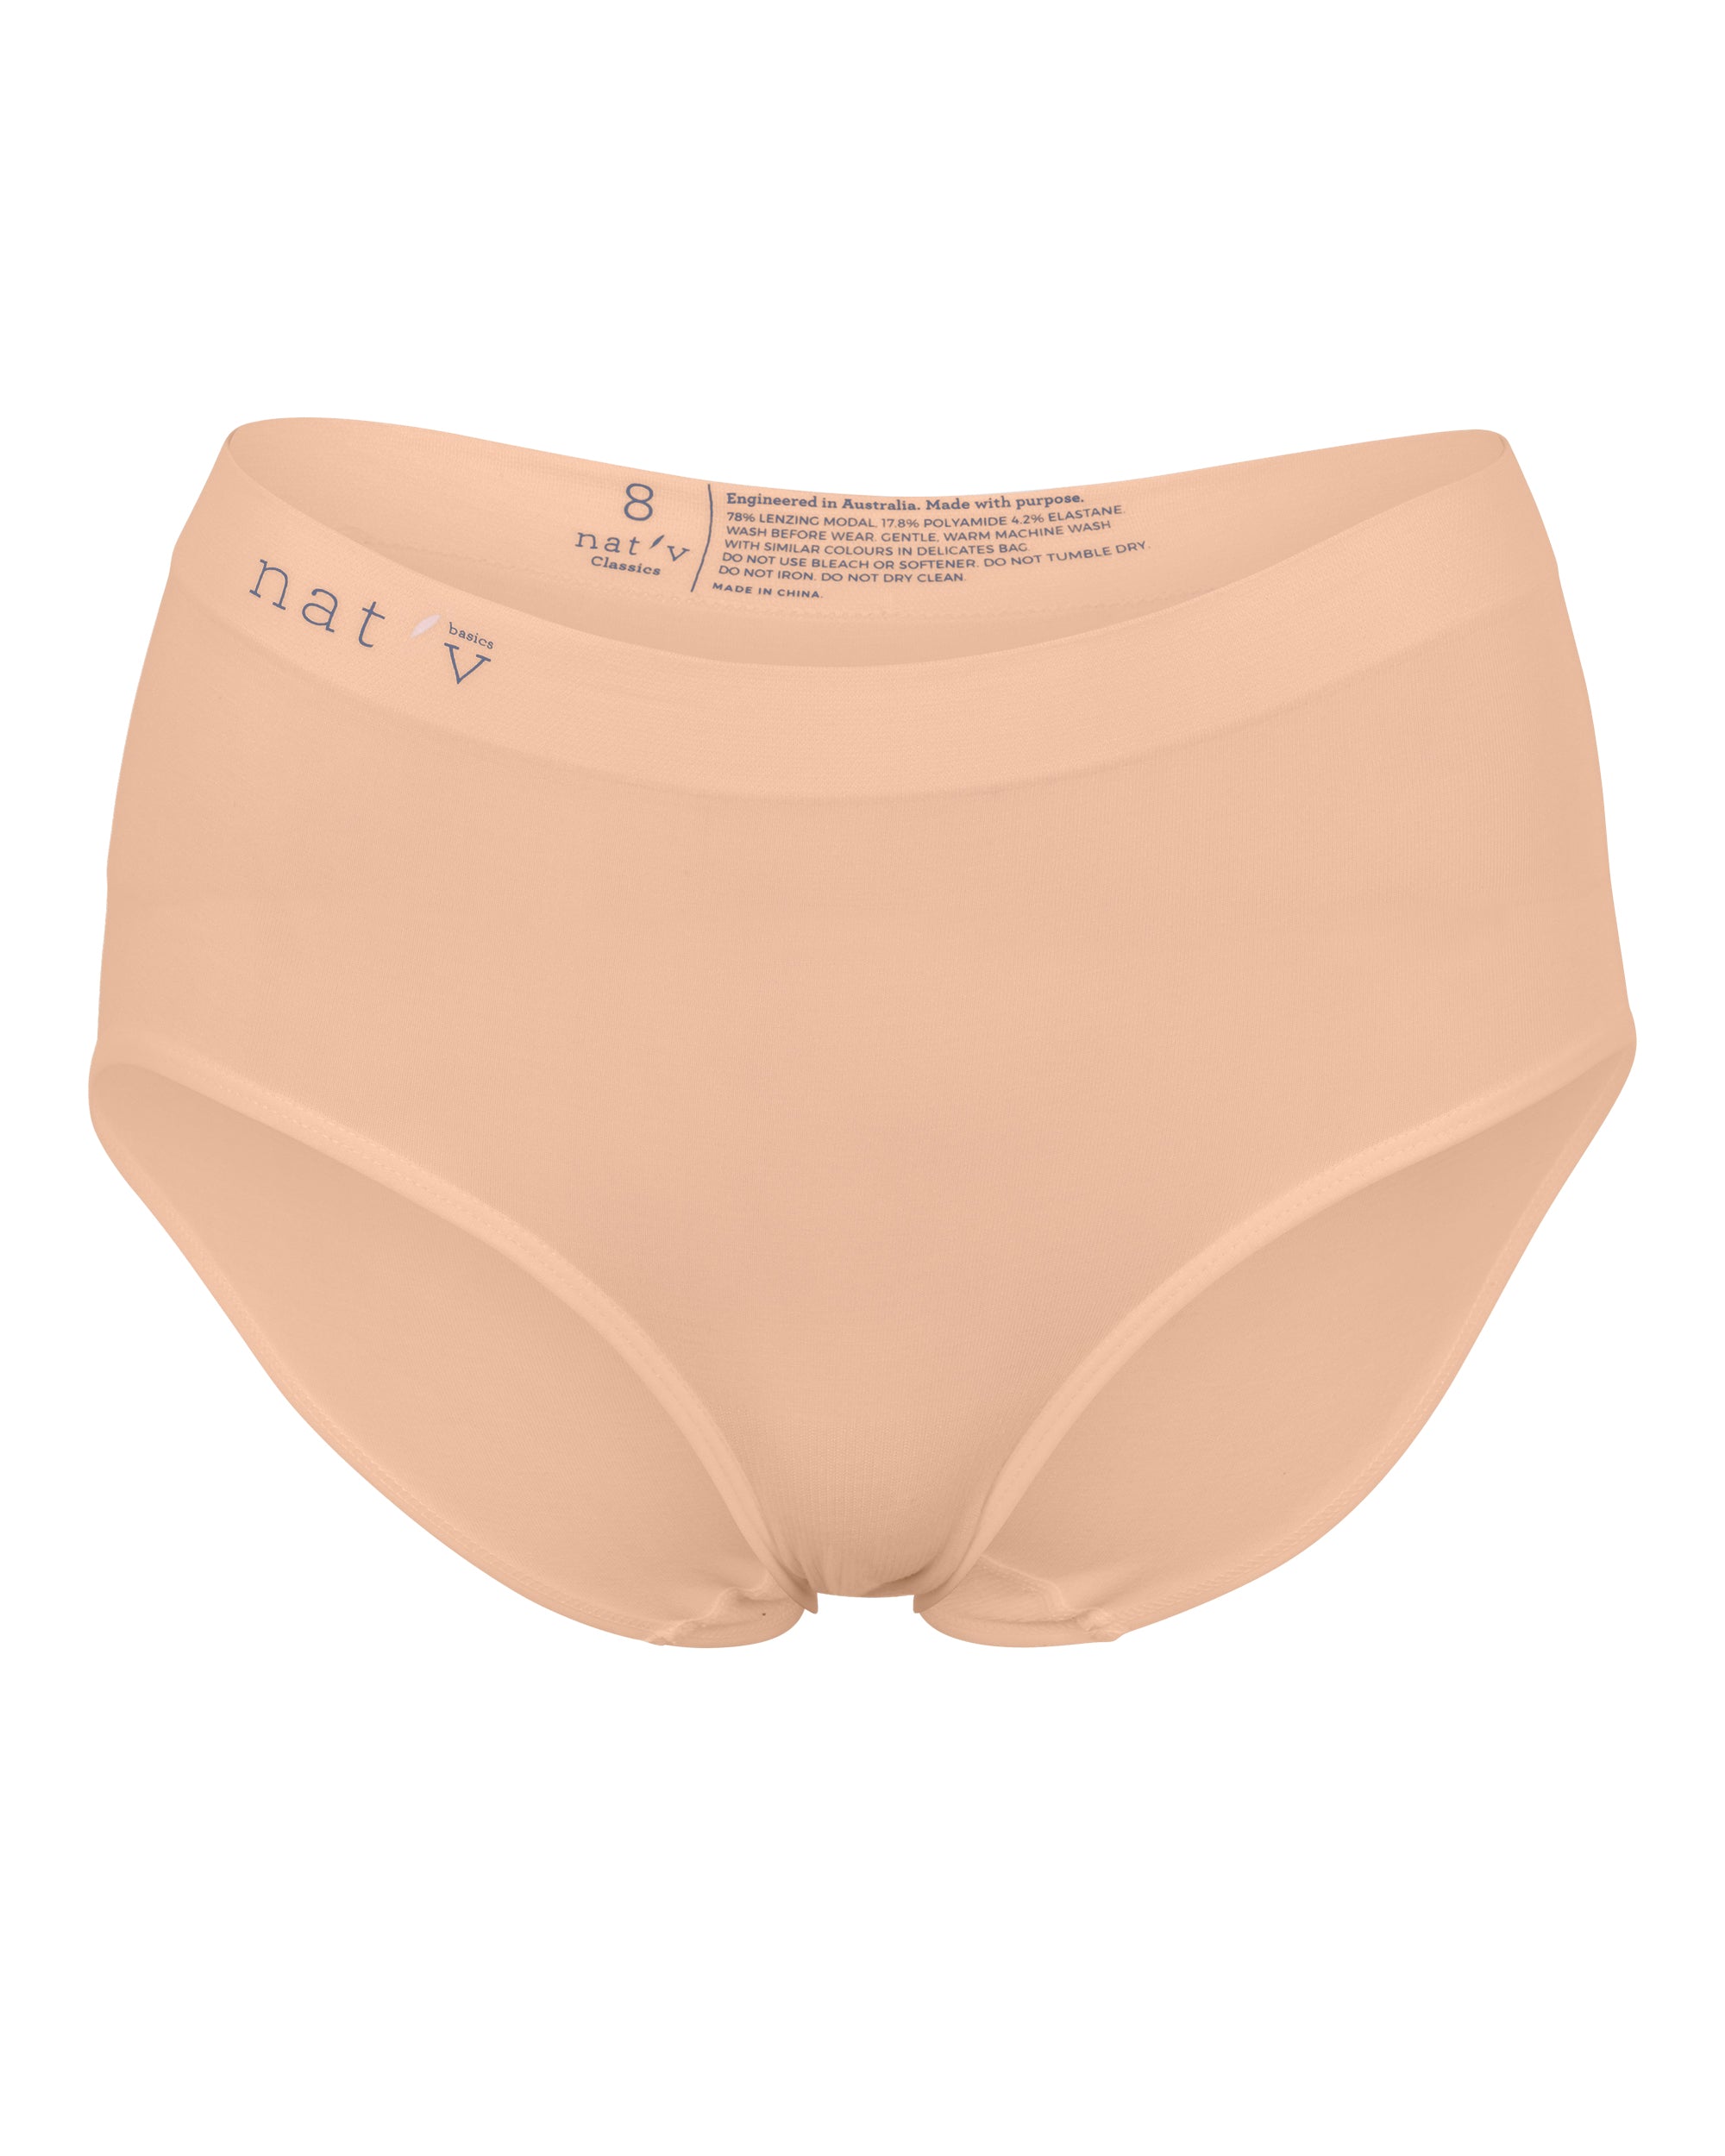 Eco Intimates - Classic Thong - Clean + Conscious